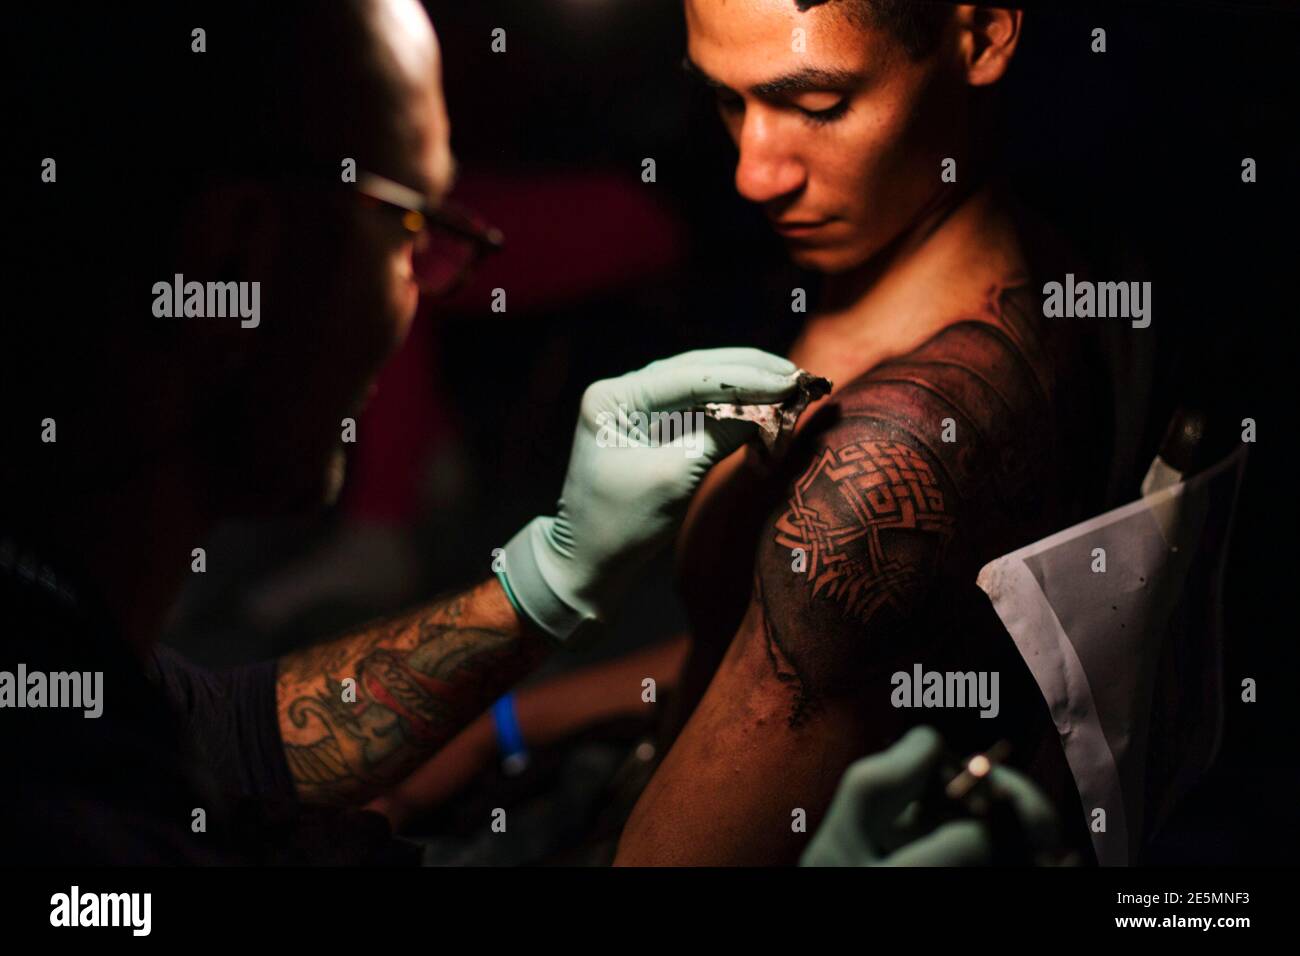 A tattoo artist works on the image of a skull and roman armor on the back  of a man at the New York City Tattoo Convention in New York May 17, 2013.